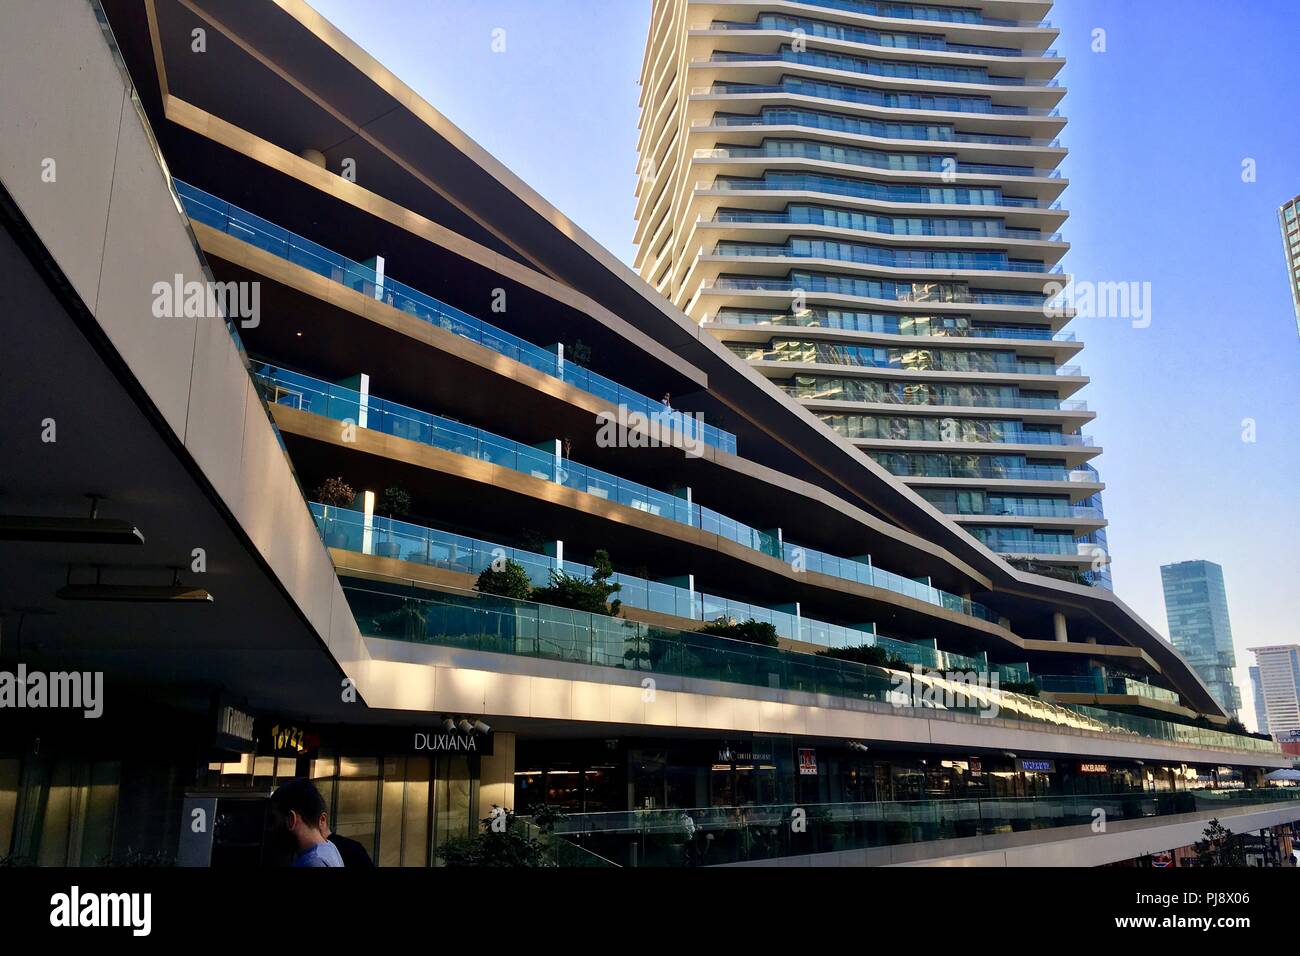 Store gallery: The Zorlu Center is the new face of Istanbul